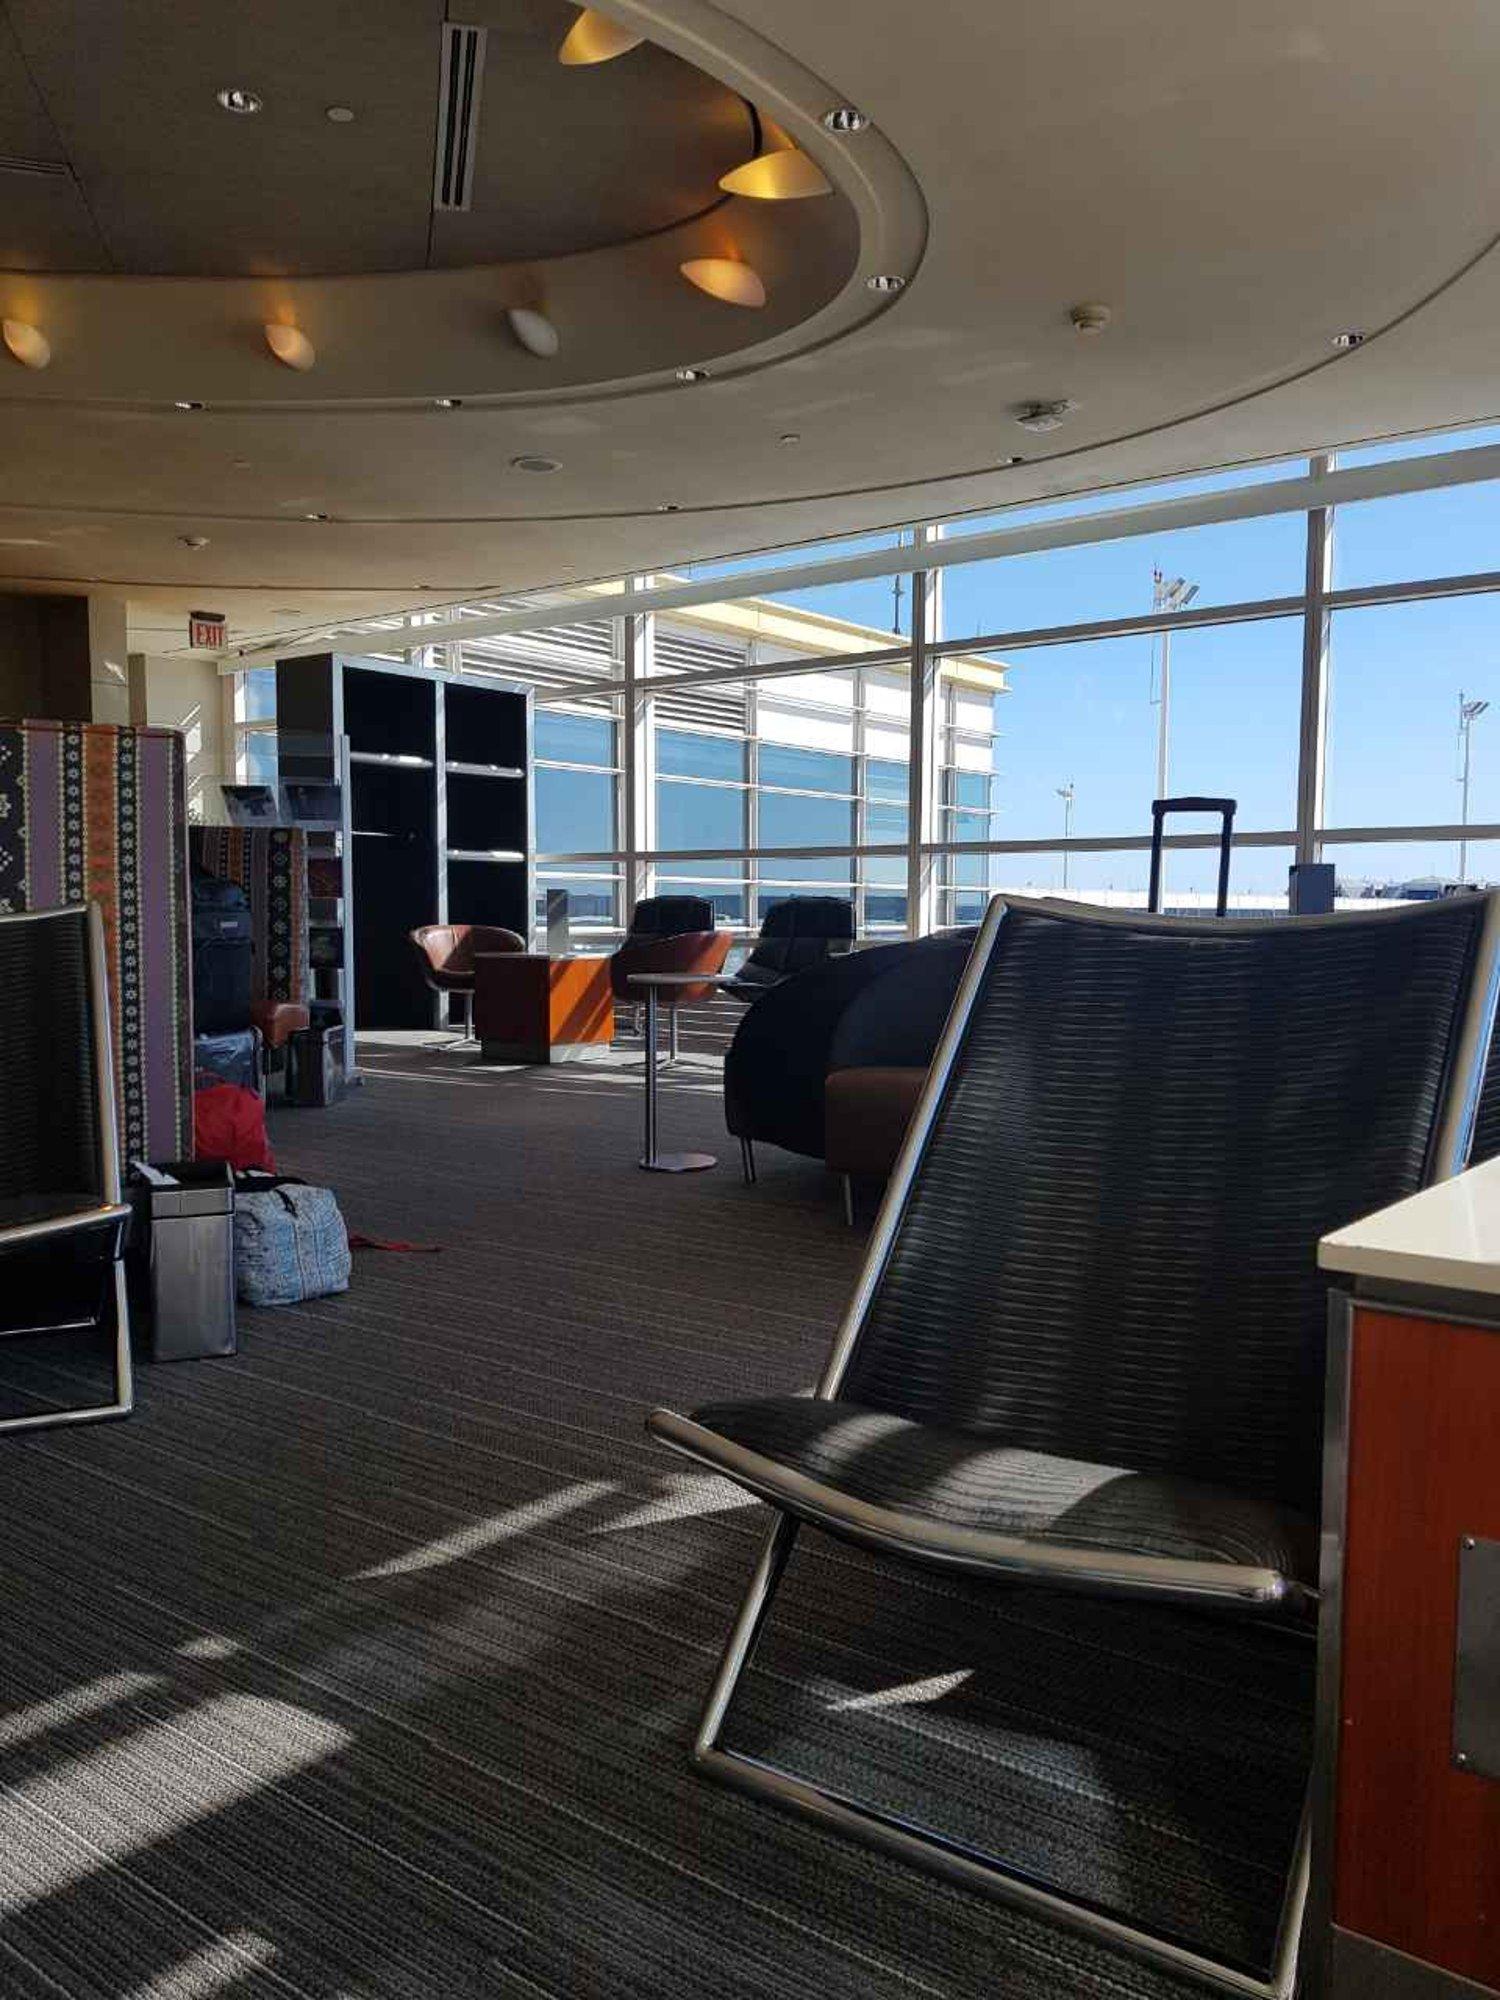 American Airlines Admirals Club image 18 of 19